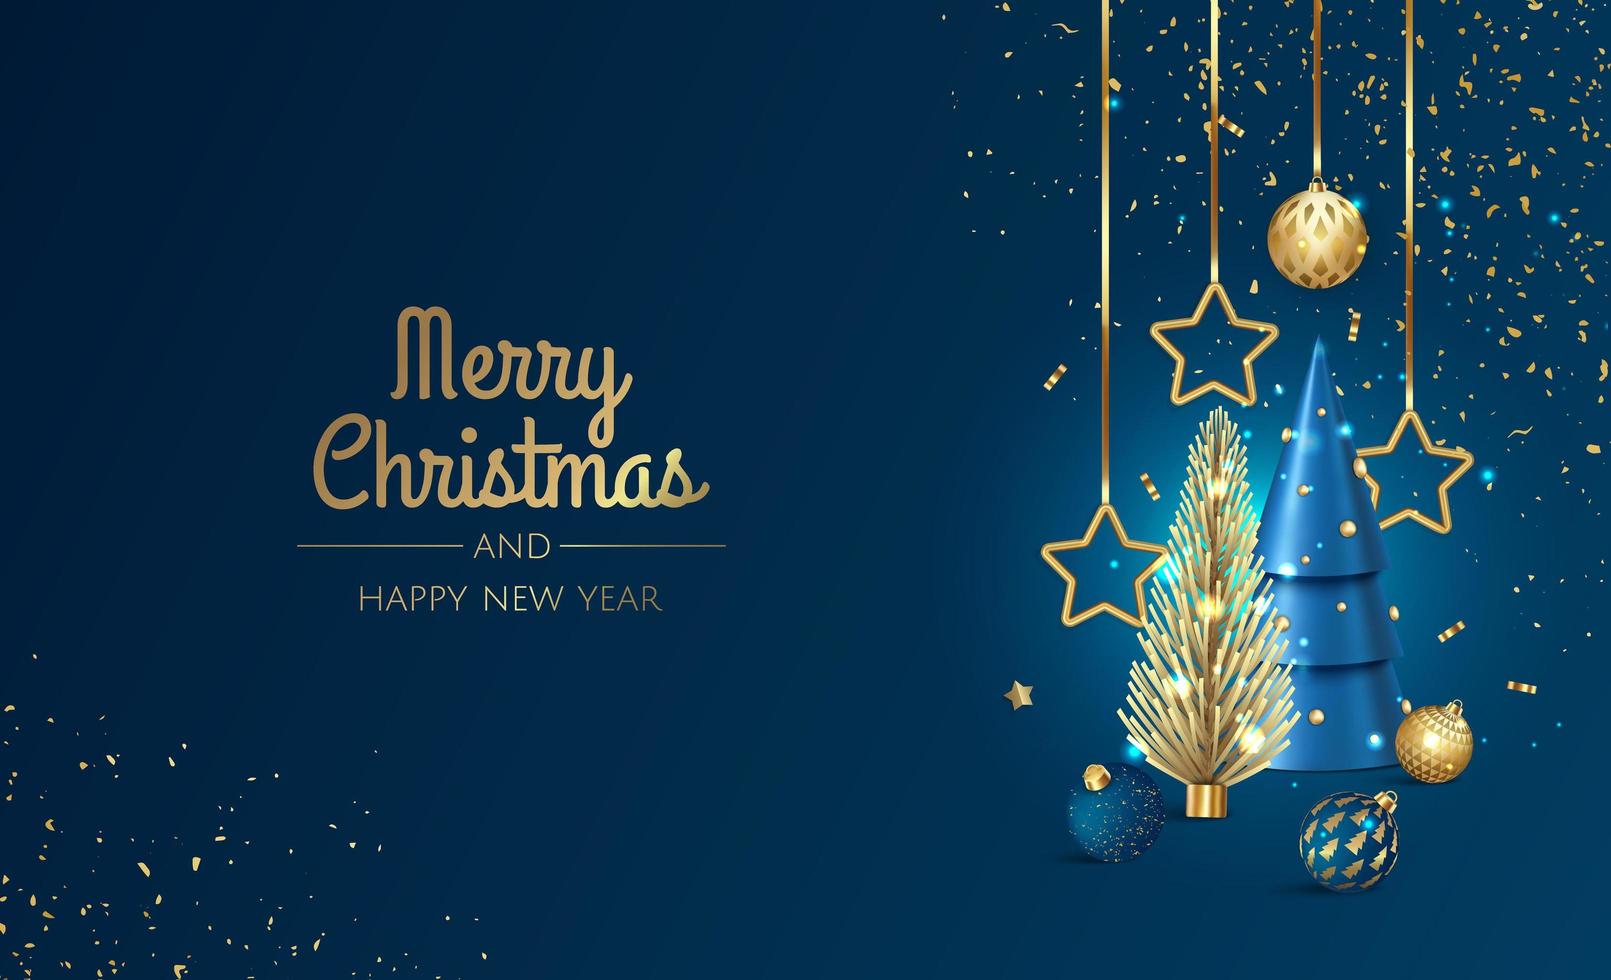 Merry Christmas and Happy New Year. Xmas Festive background with realistic 3d objects, white and gold balls. vector